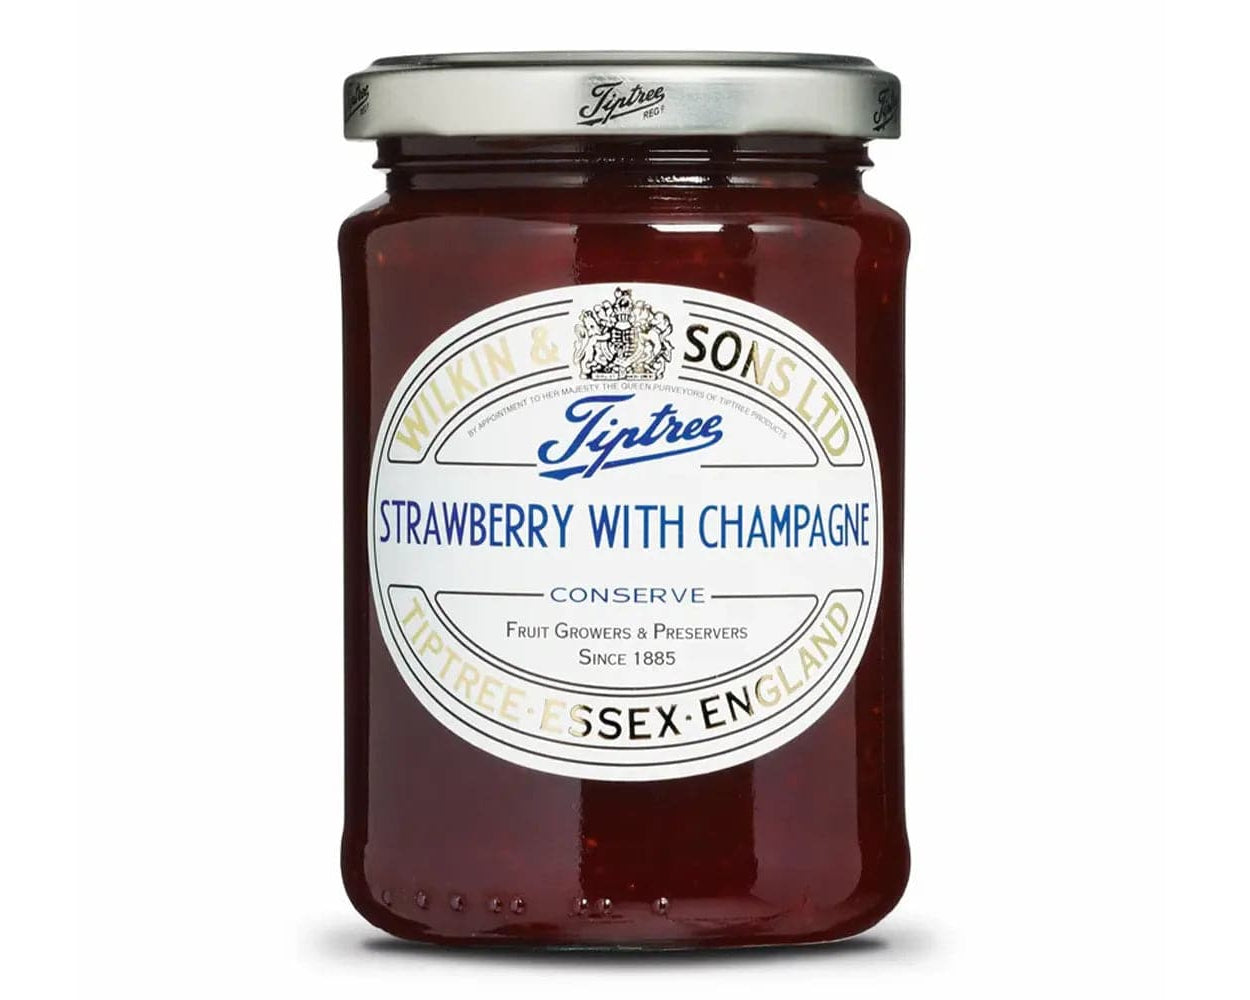 Tiptree Strawberry with Champagne Conserve - IMP & MAKER